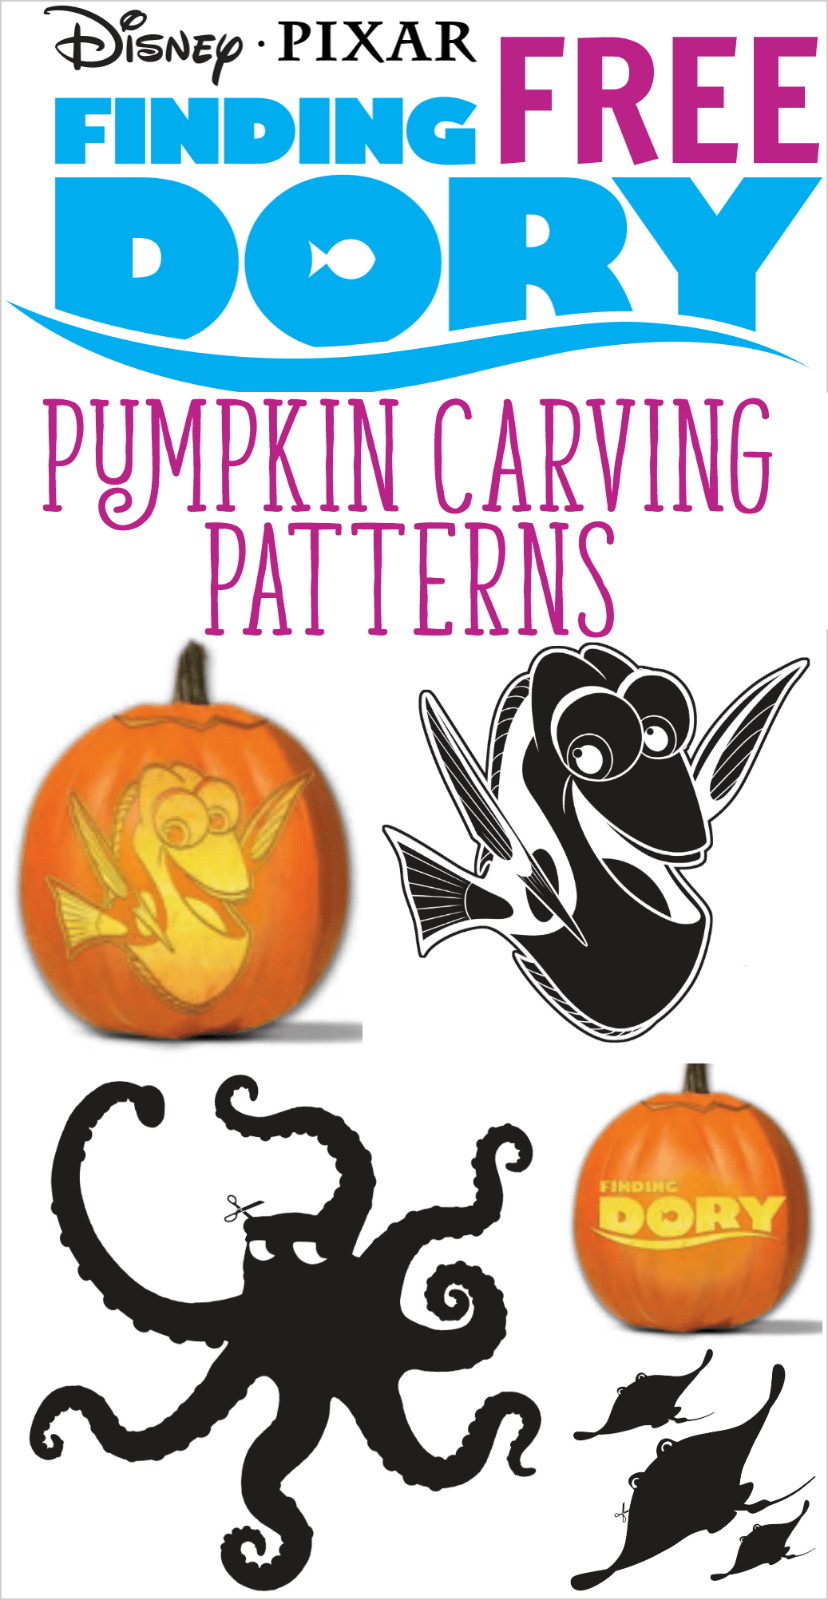 Free Finding Dory Pumpkin Carving Patterns To Print! | All Things - Pumpkin Carving Patterns Free Printable